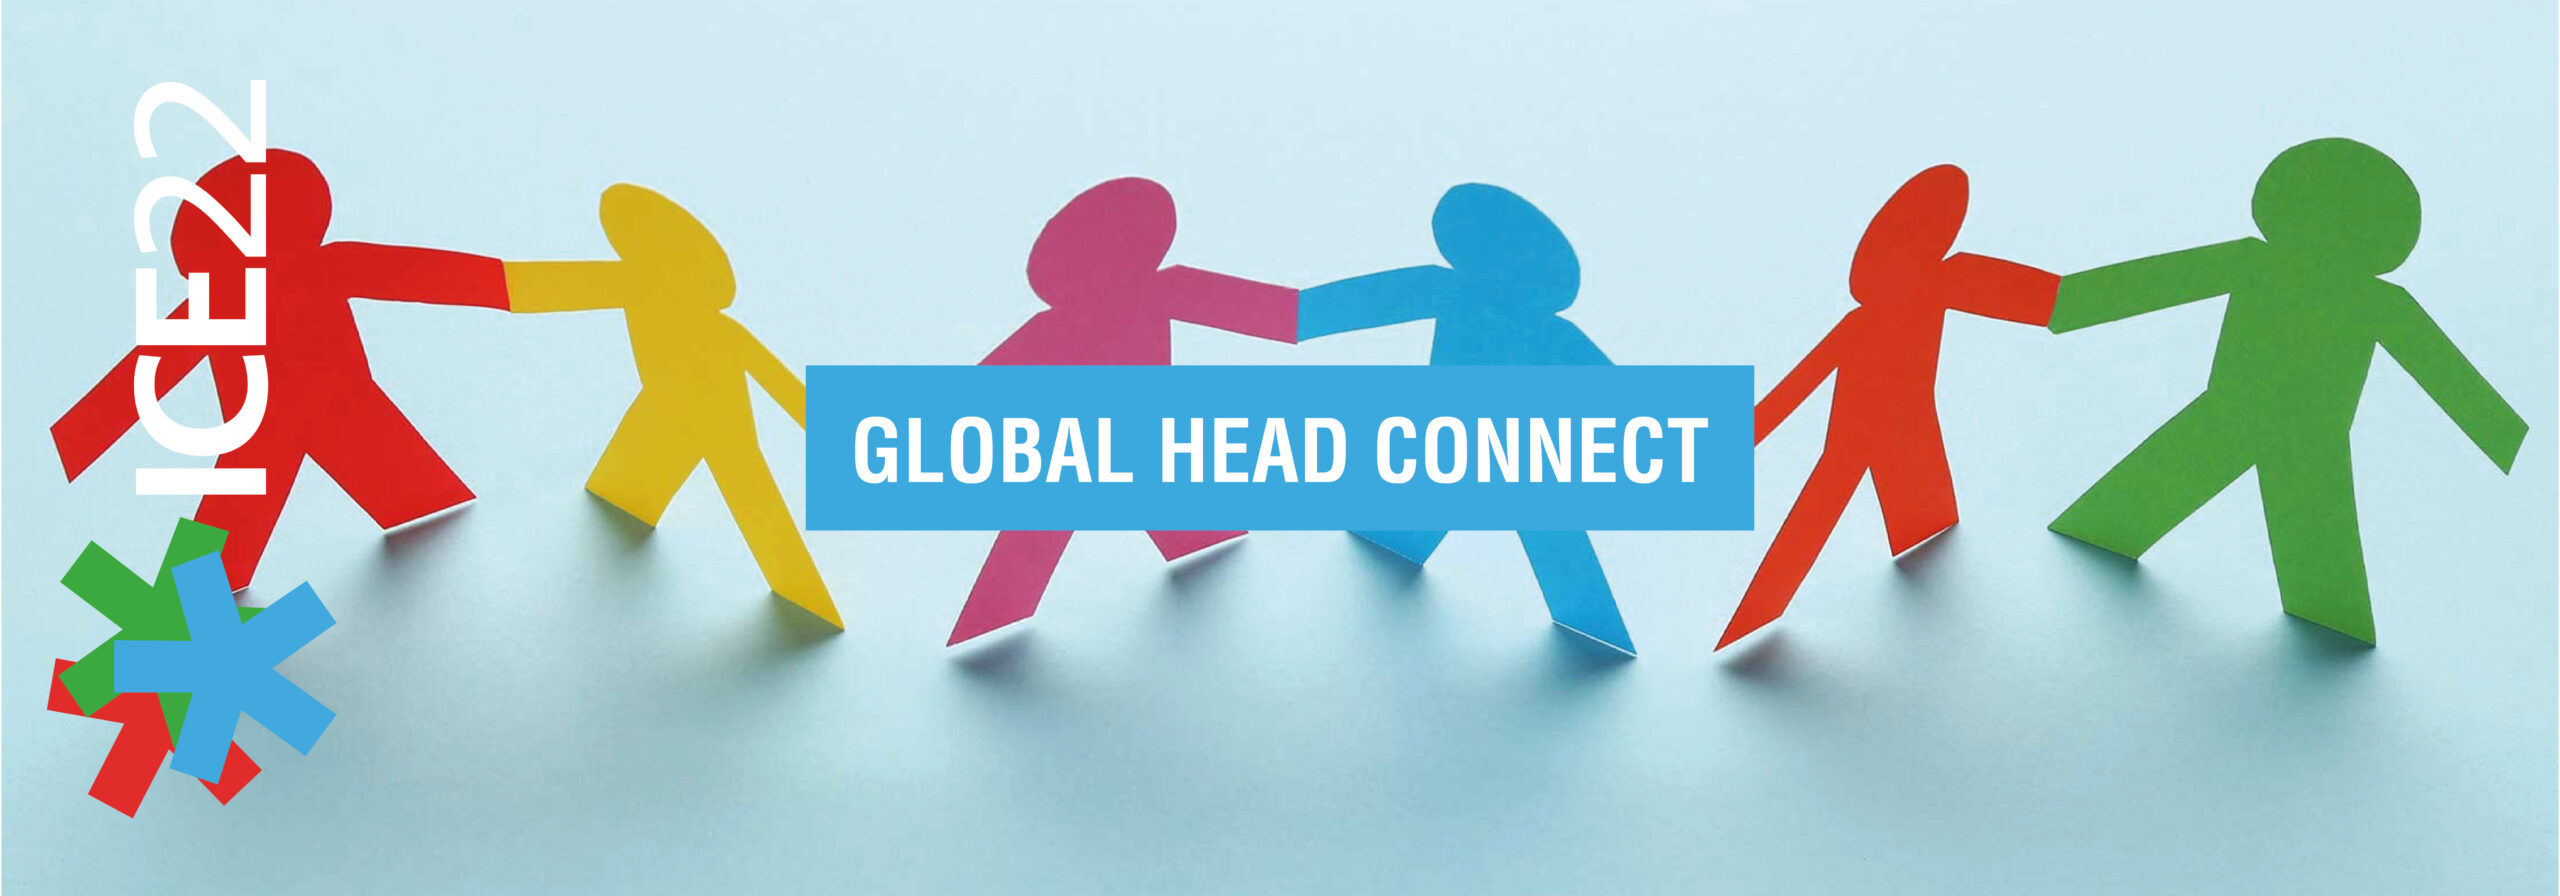 GLOBAL HEAD CONNECT